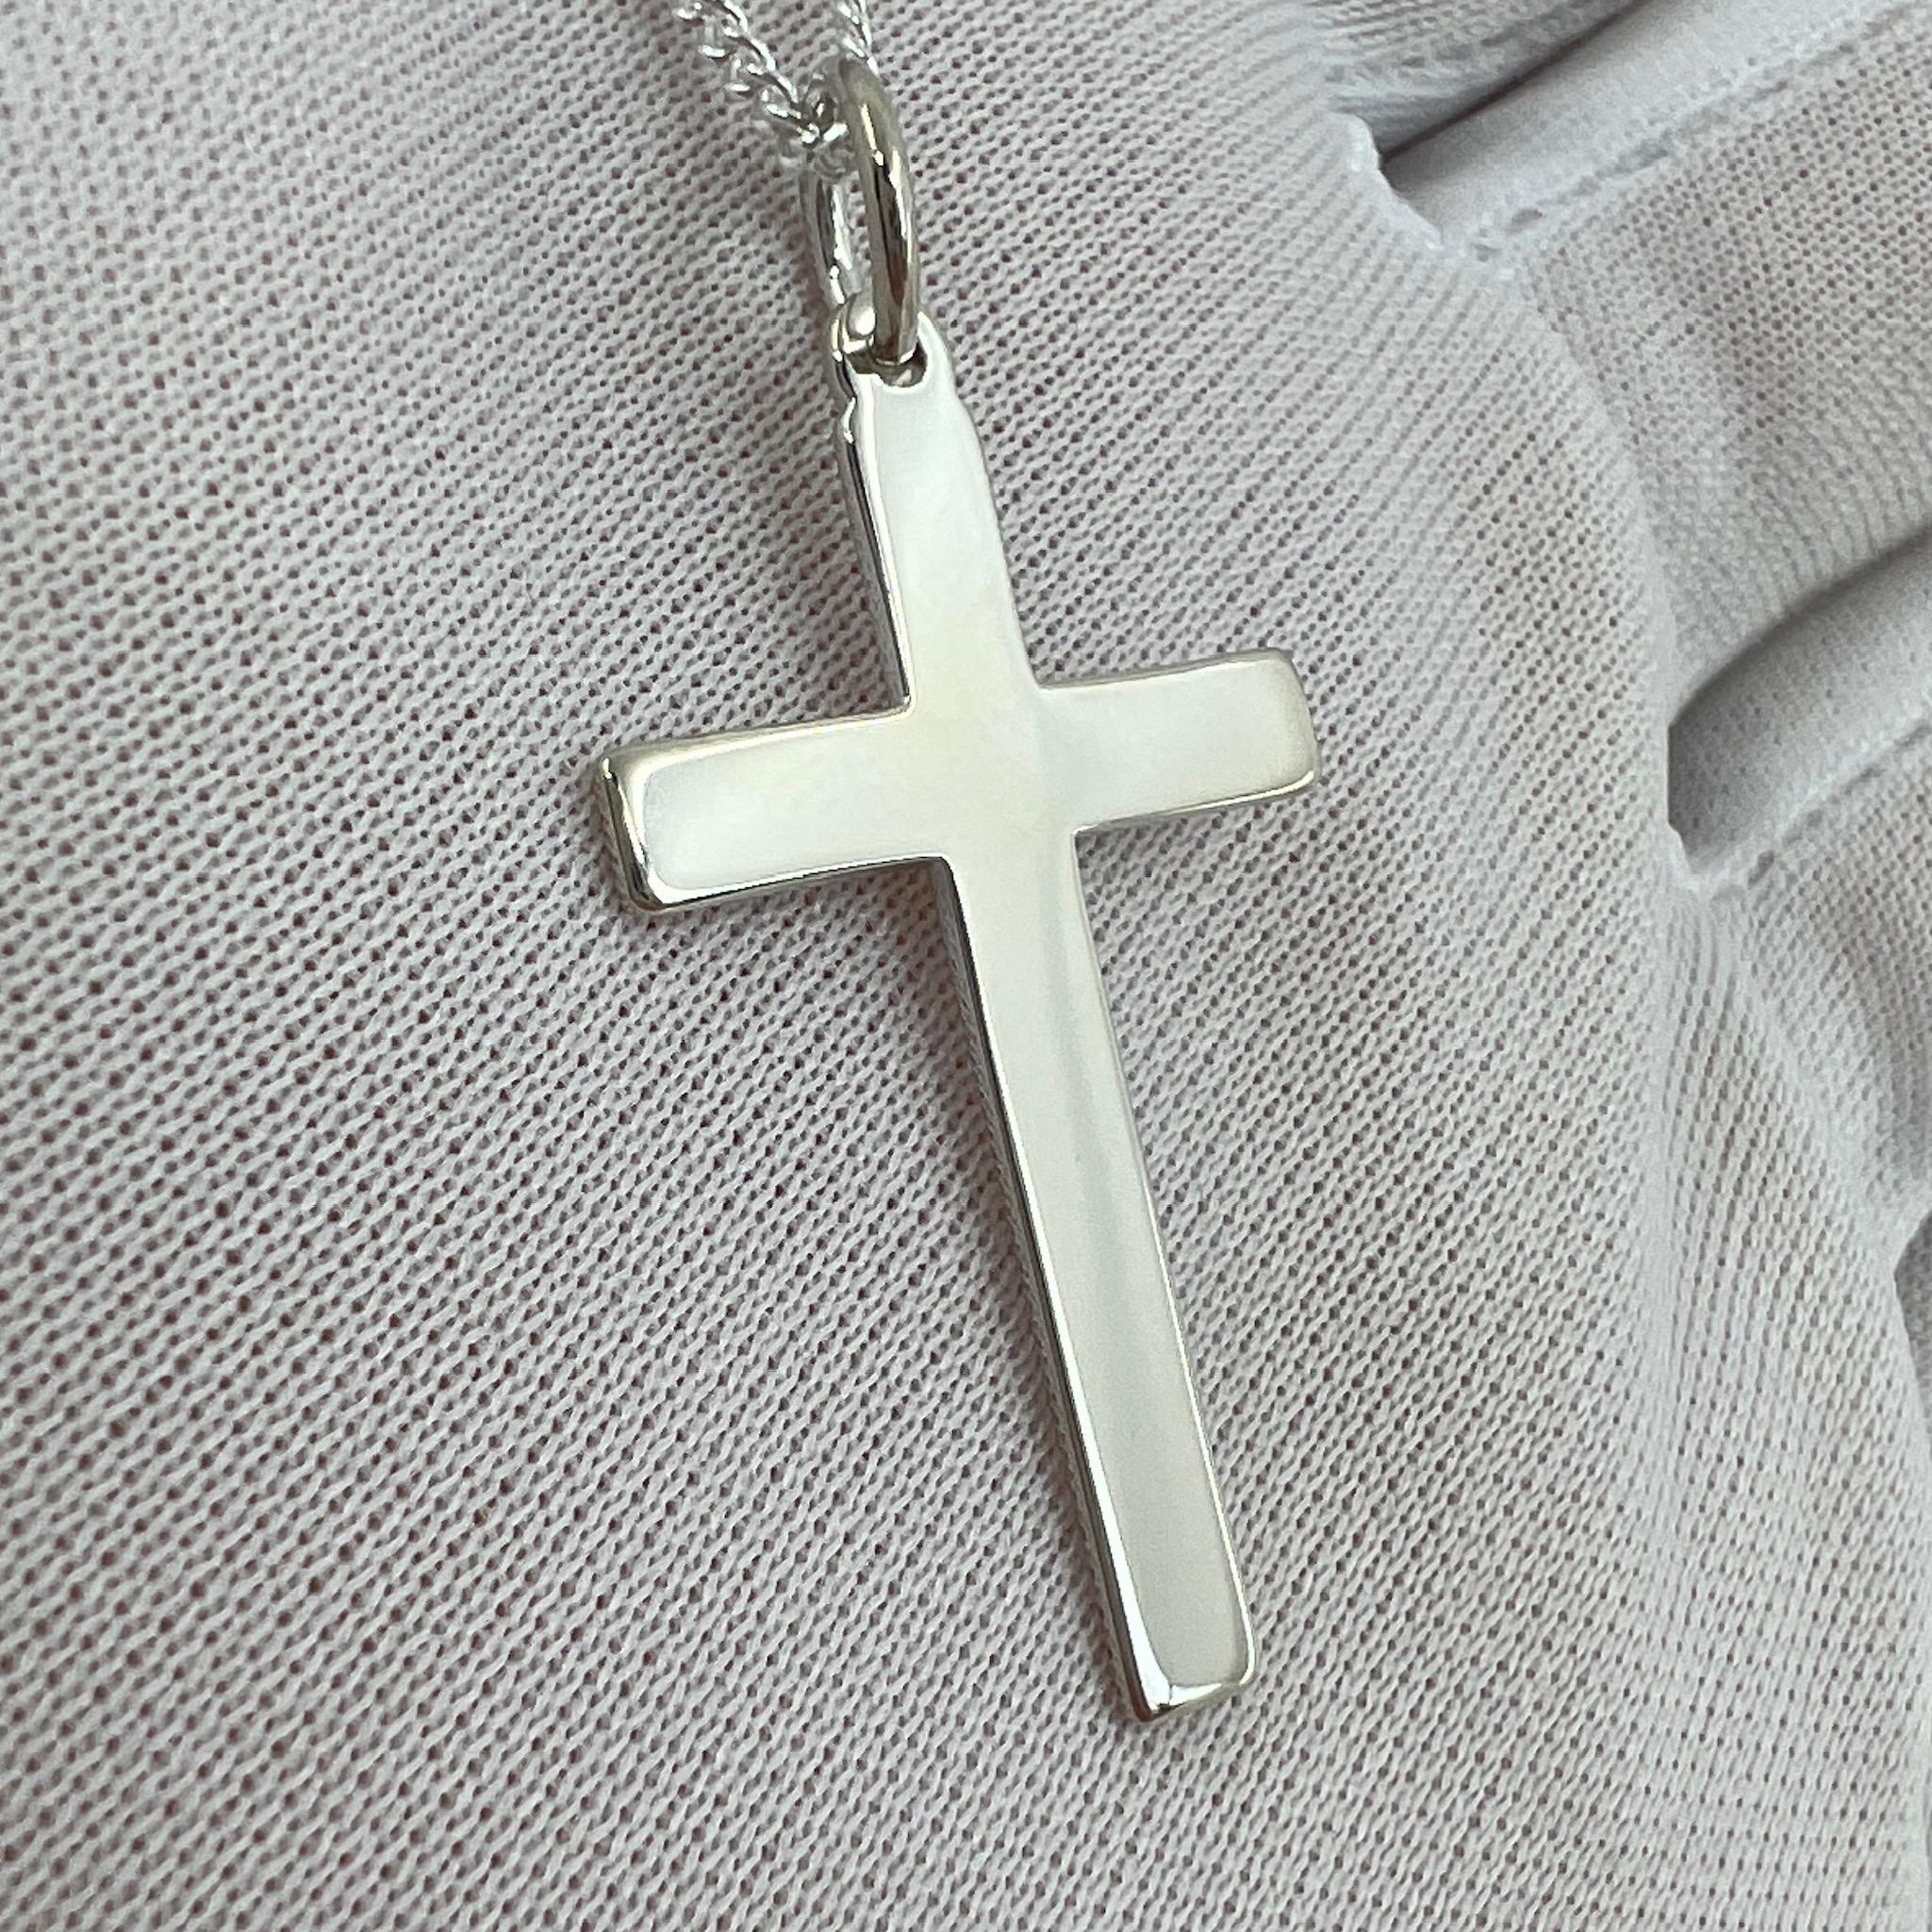 Brand new 925 Sterling Silver Cross Pendant Necklace.

Beautiful 32x18mm cross pendant weighing 1.54g hanging on an 18' (45cm) curb chain.

Brand new and never worn. 

Cross an chain together weigh 4.2g.

All our jewellery is posted safely and